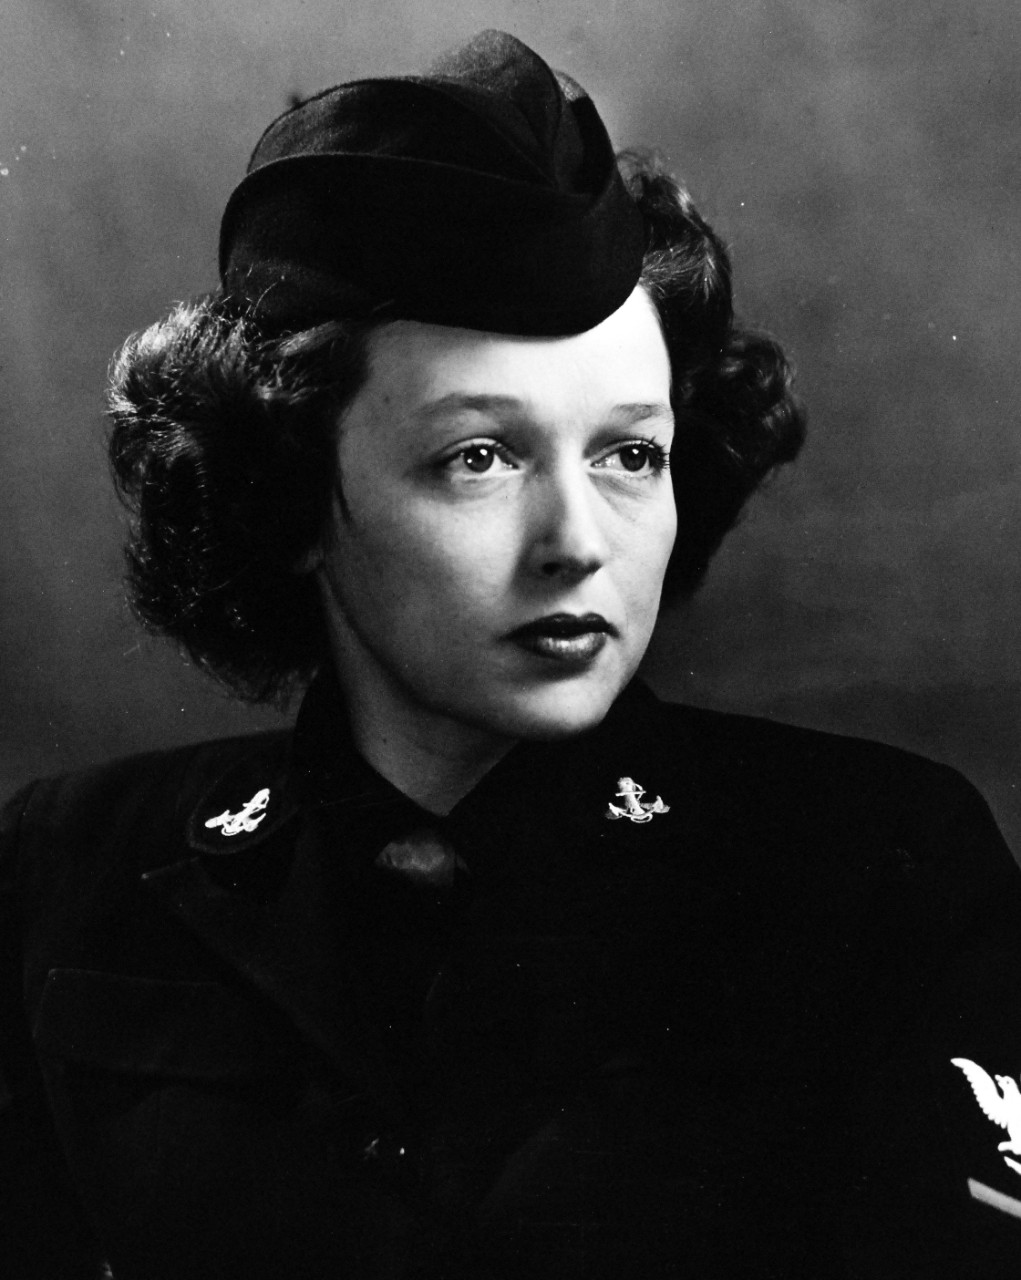 80-G-47174:  Yeoman Third Class Kittye Coleman, December 1944.   Coleman models the specifically designed garrison hat for U.S. Navy officers and enlisted WAVES, December 1, 1944.  Official U.S. Navy photograph, now in the collections of the National Archives.  